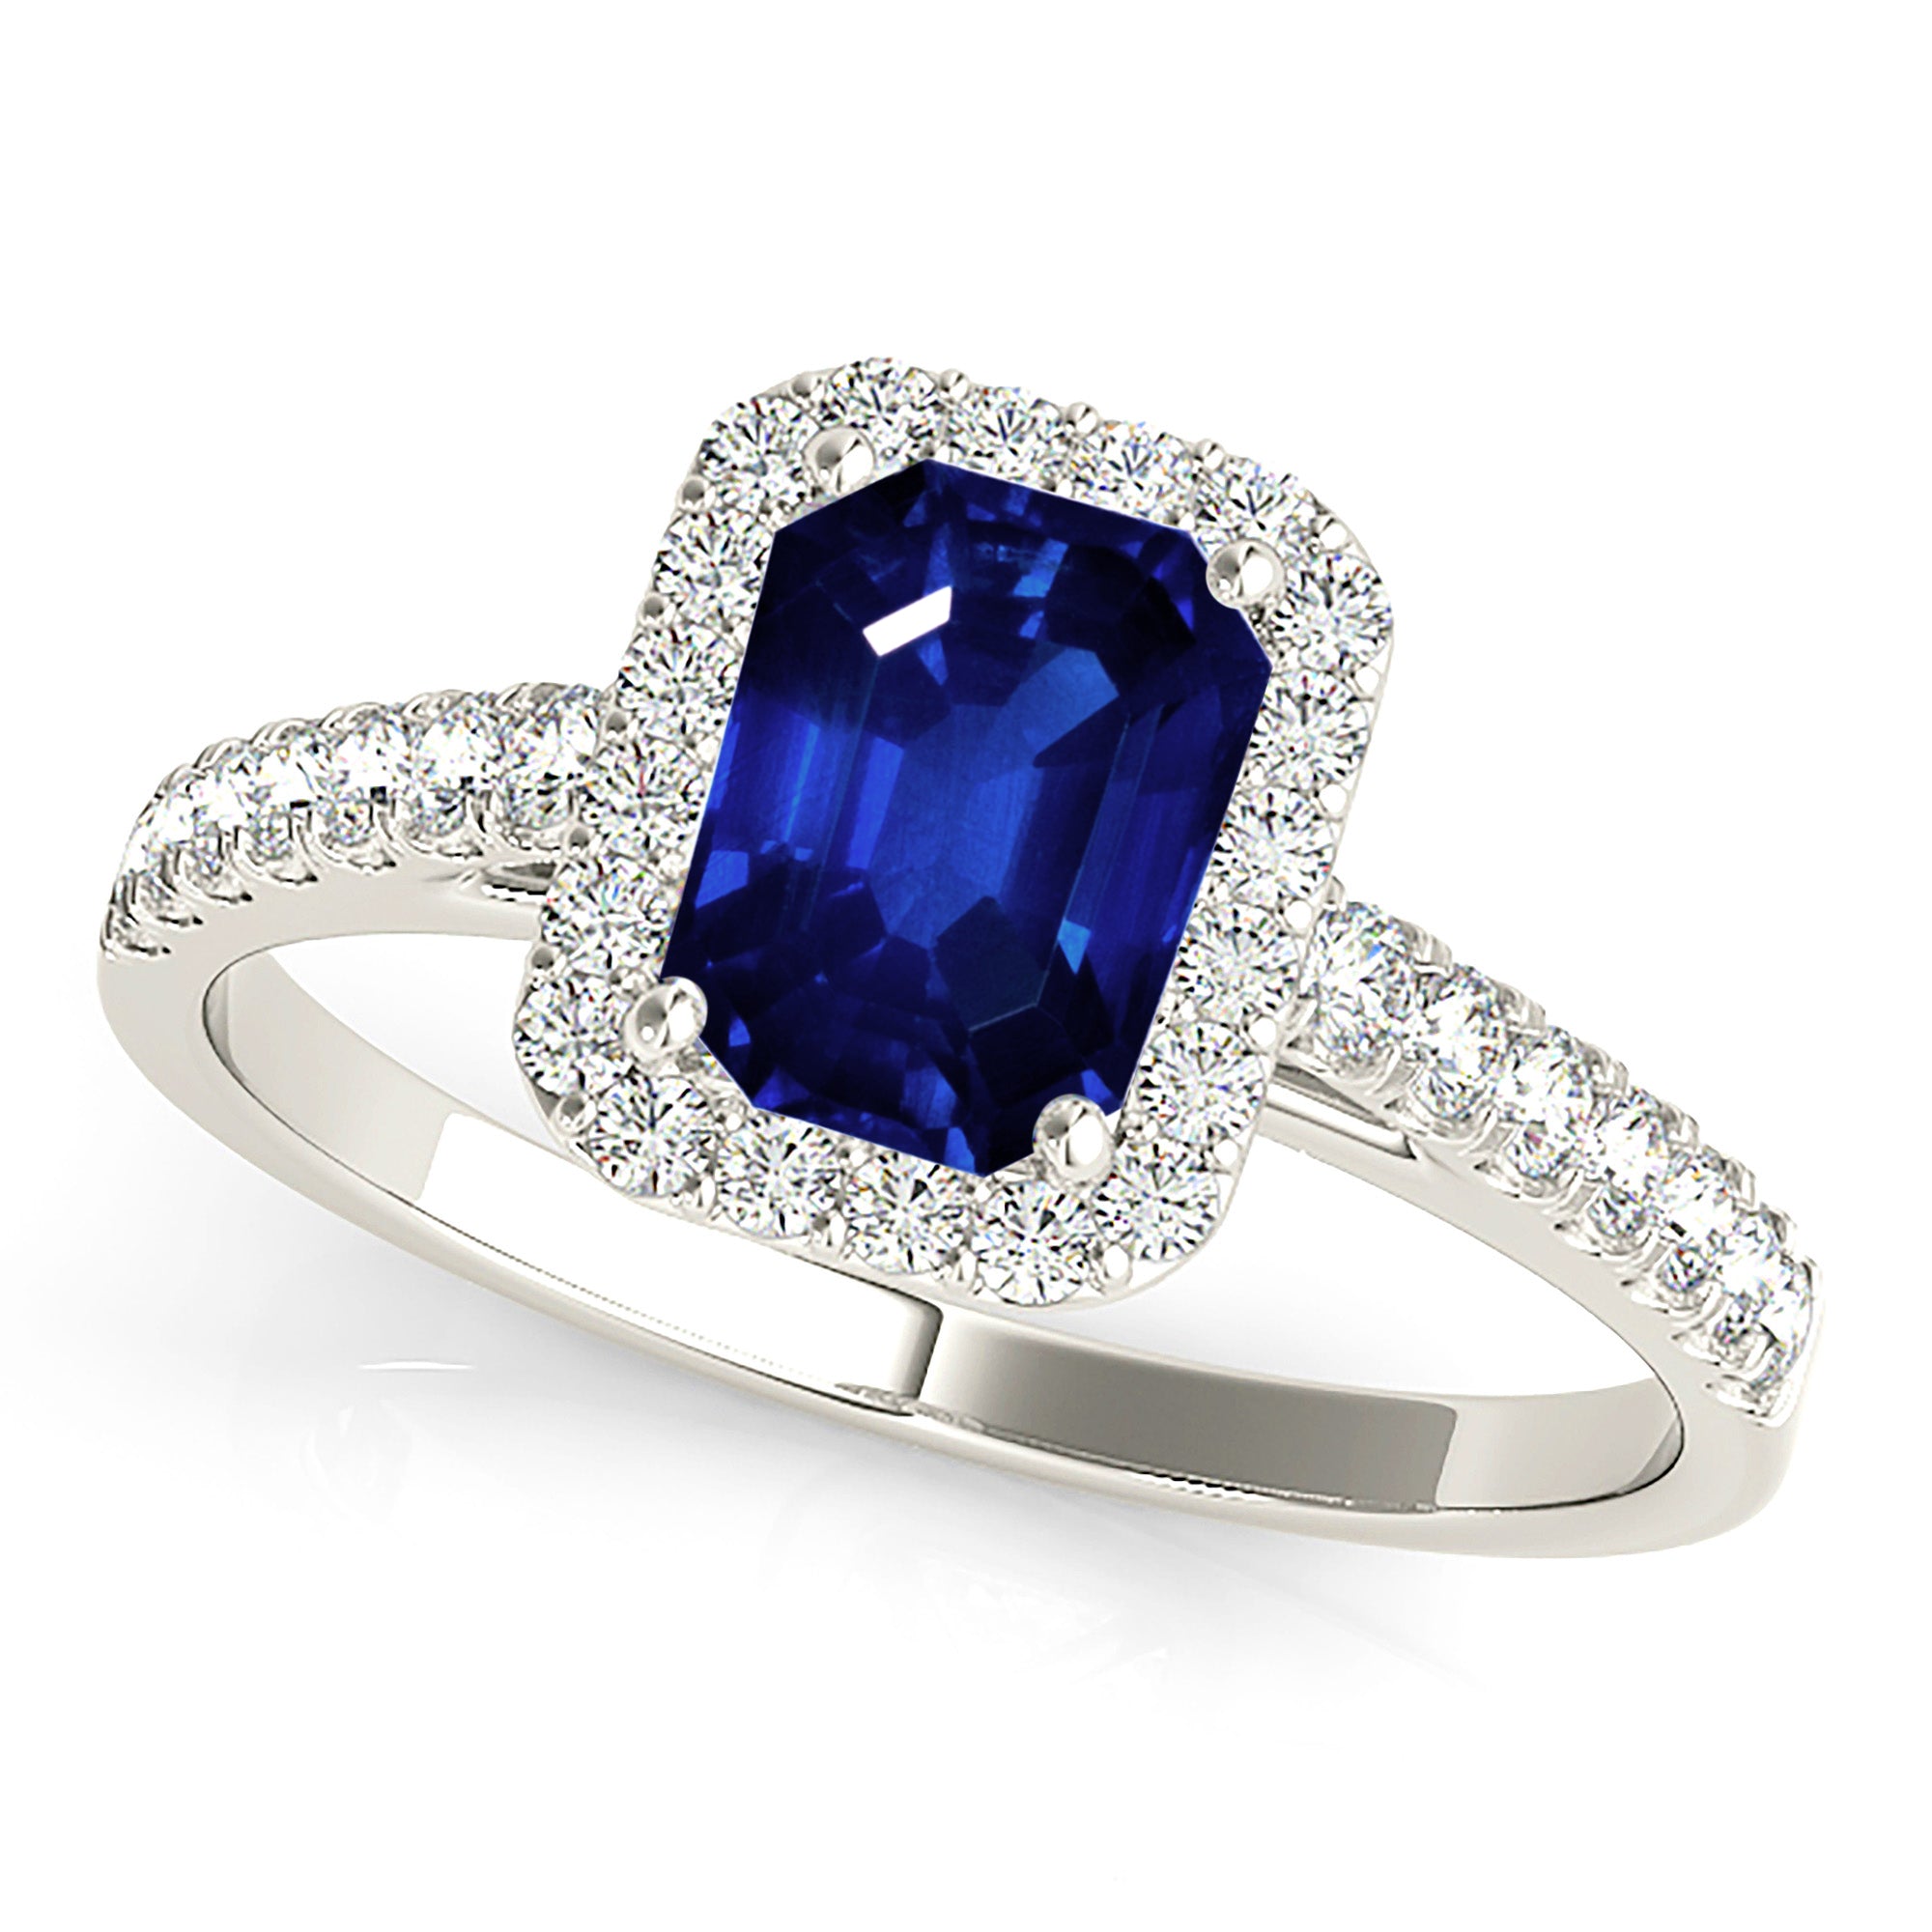 1.15 ct. Genuine Blue Emerald Cut Sapphire Ring With 0.25 ctw. Diamond Halo, Delicate Diamond Band | Natural Sapphire And Diamond Ring-in 14K/18K White, Yellow, Rose Gold and Platinum - Christmas Jewelry Gift -VIRABYANI